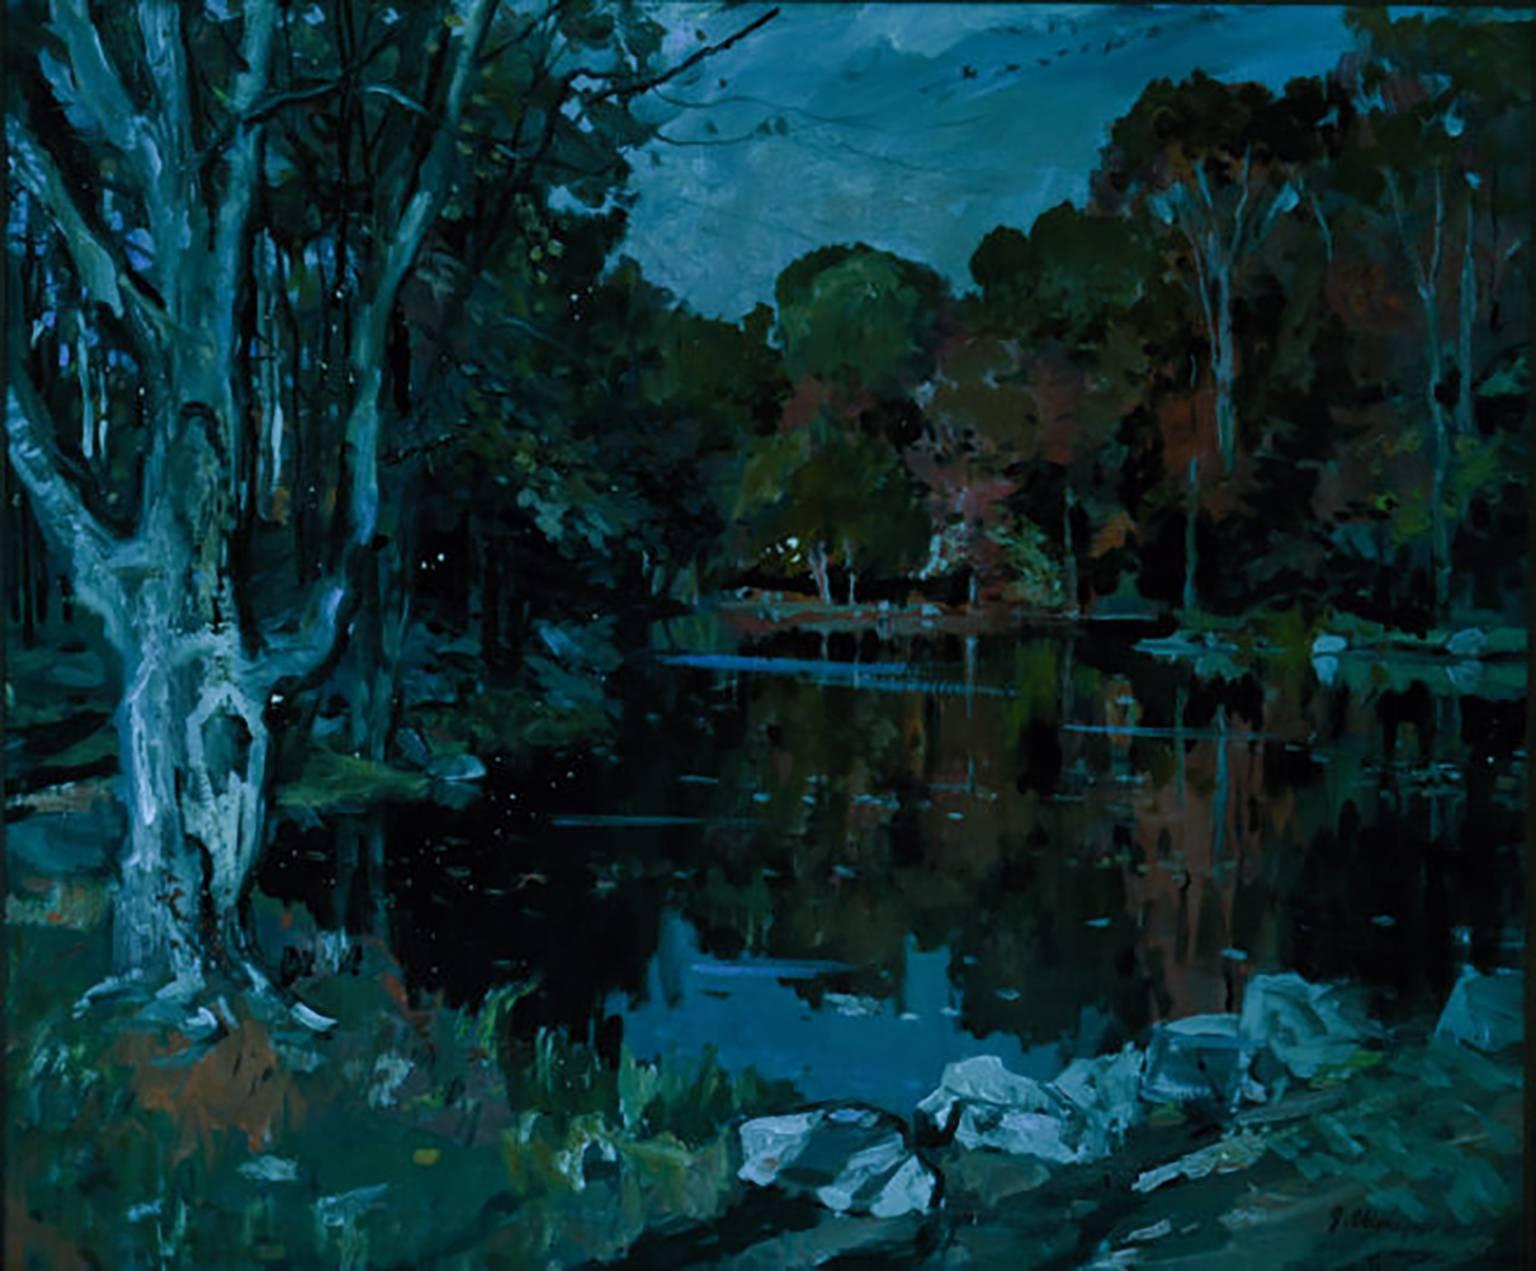 George Cherepov (American, 1909-1987) oil on canvas impressionist style autumn landscape painting, depicting a lake surrounded by trees with changing leaves  Painting is Signed lower right “G Cherepov”  Circa 1940s  Housed in a Giltwood and molded